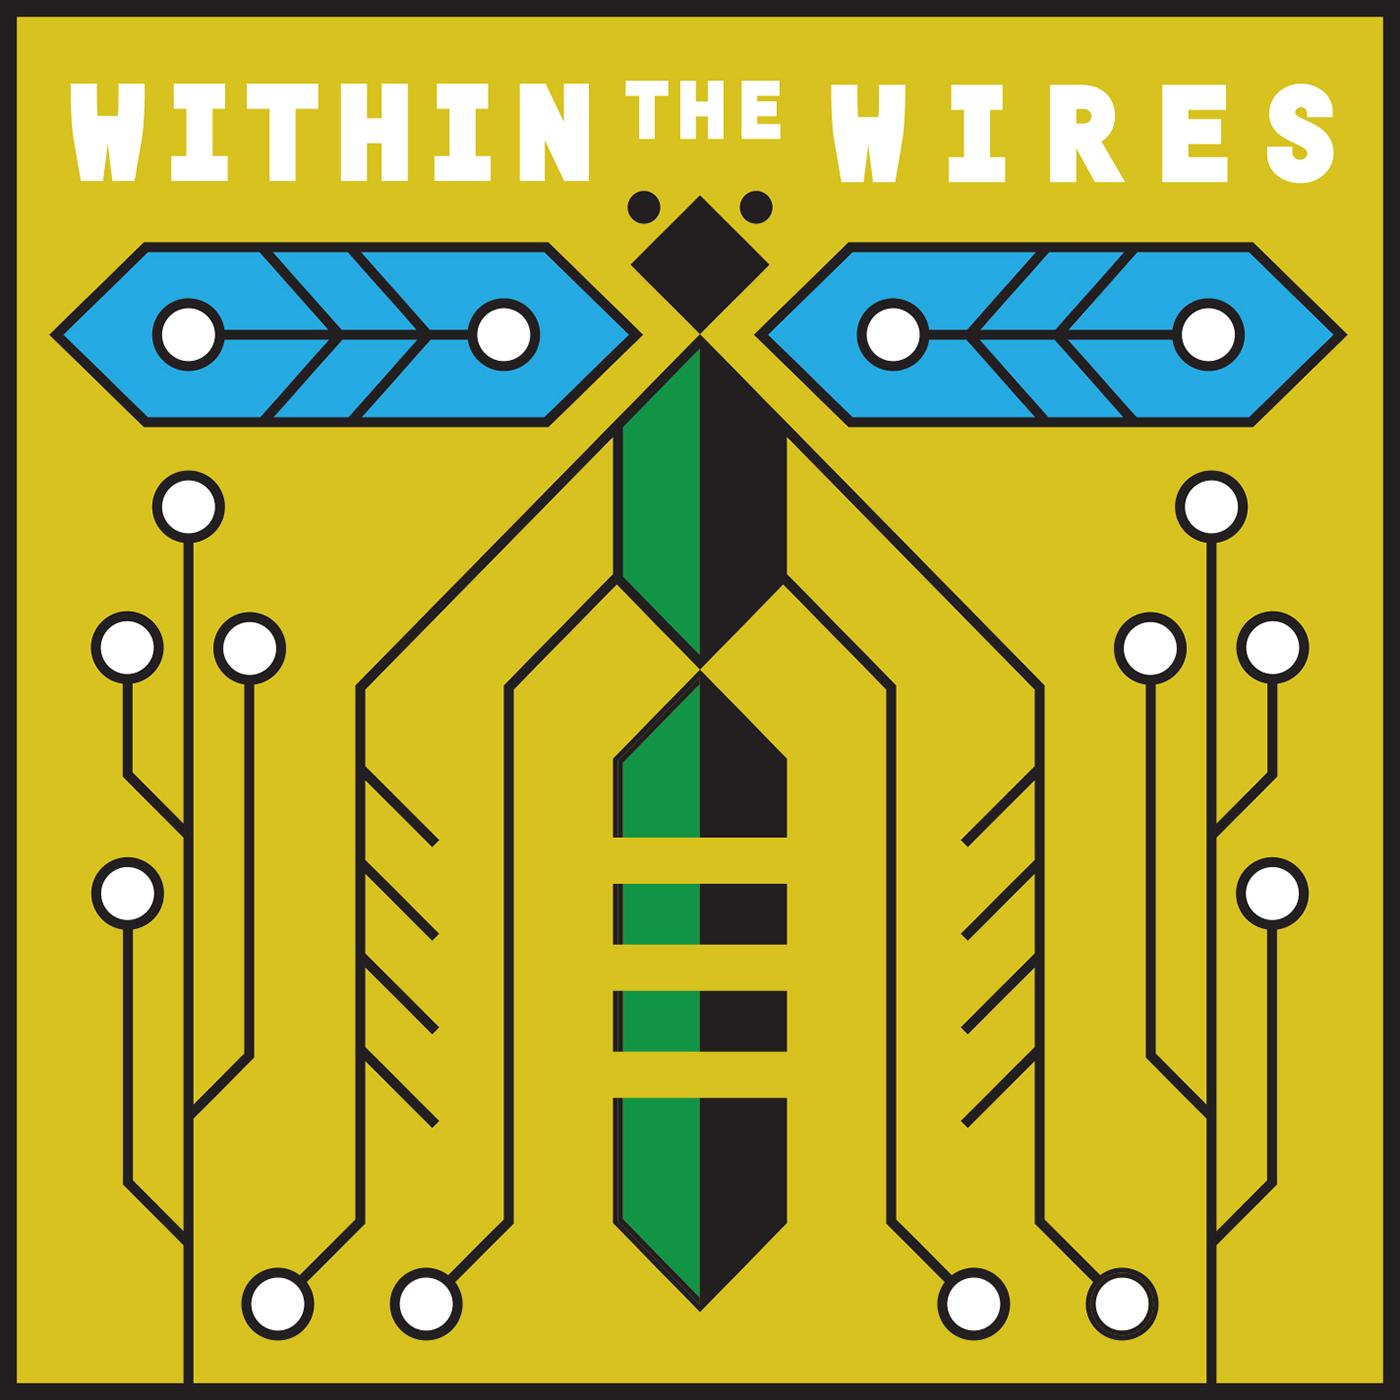 Thumbnail for "Within the Wires: Relaxation Cassette #1".